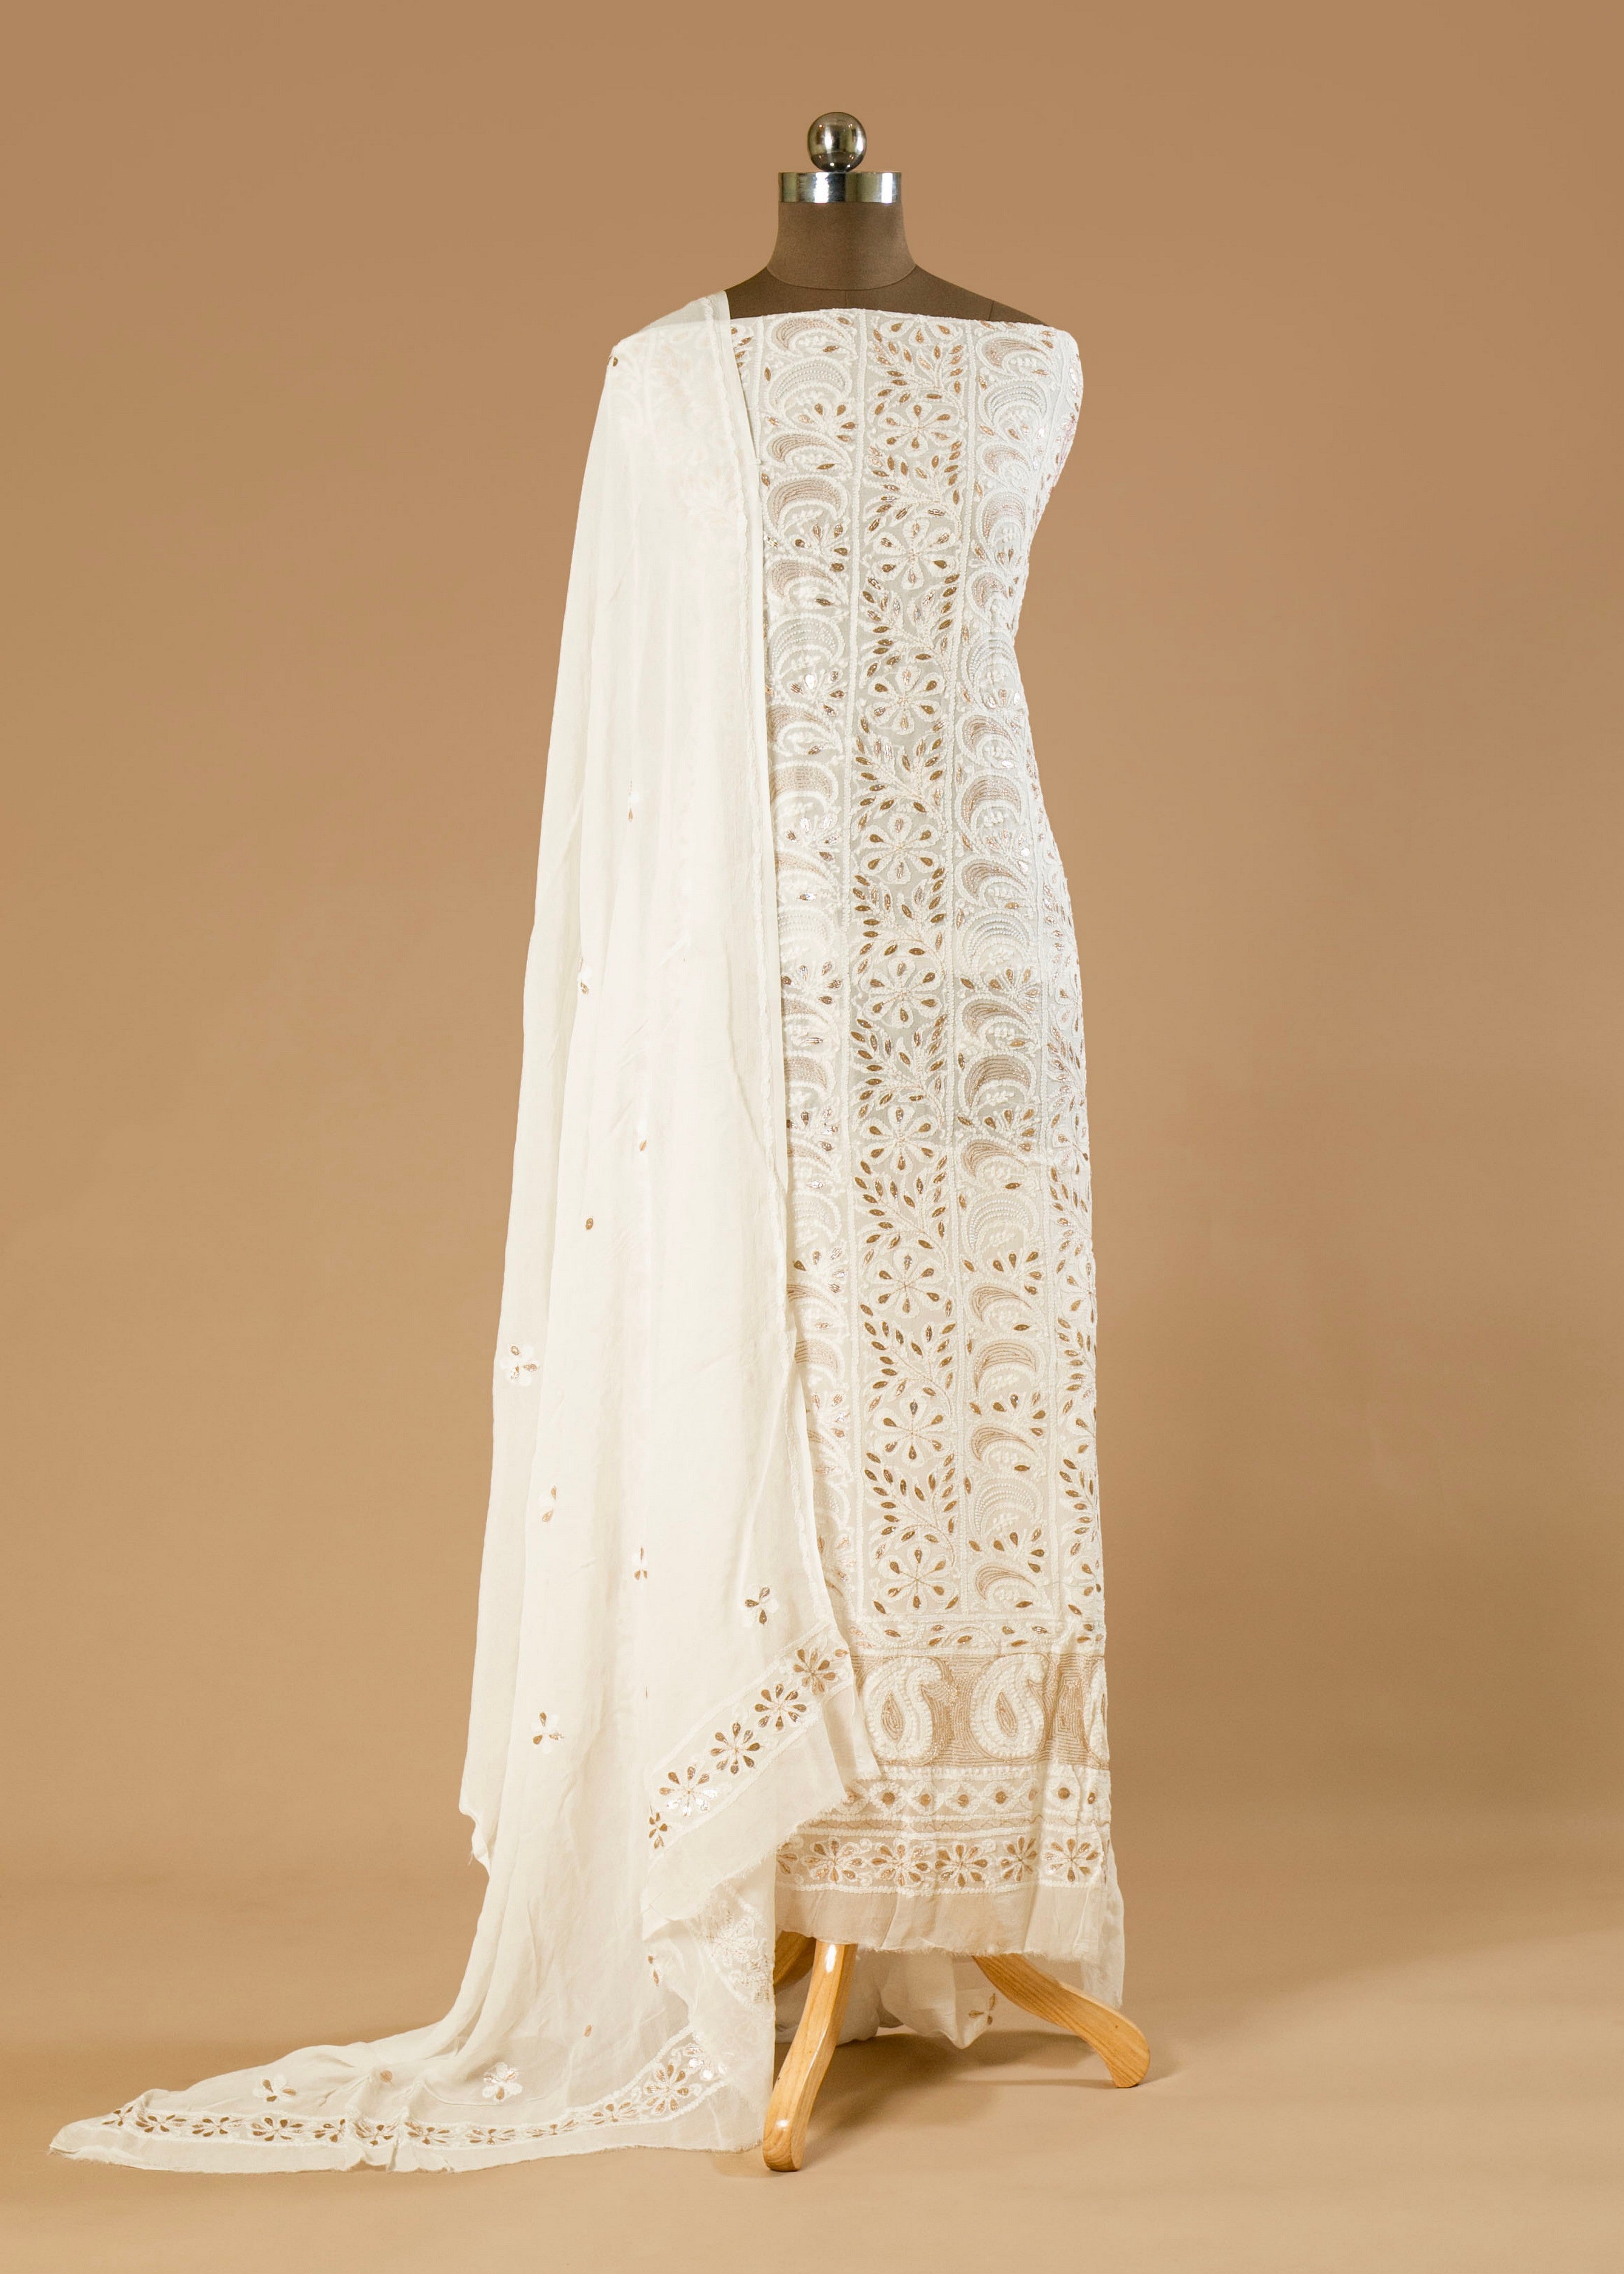 Dyeable Hand-Embroidered Chikankari Lucknowi Suit with Pearl, Gota, and Shadow Work